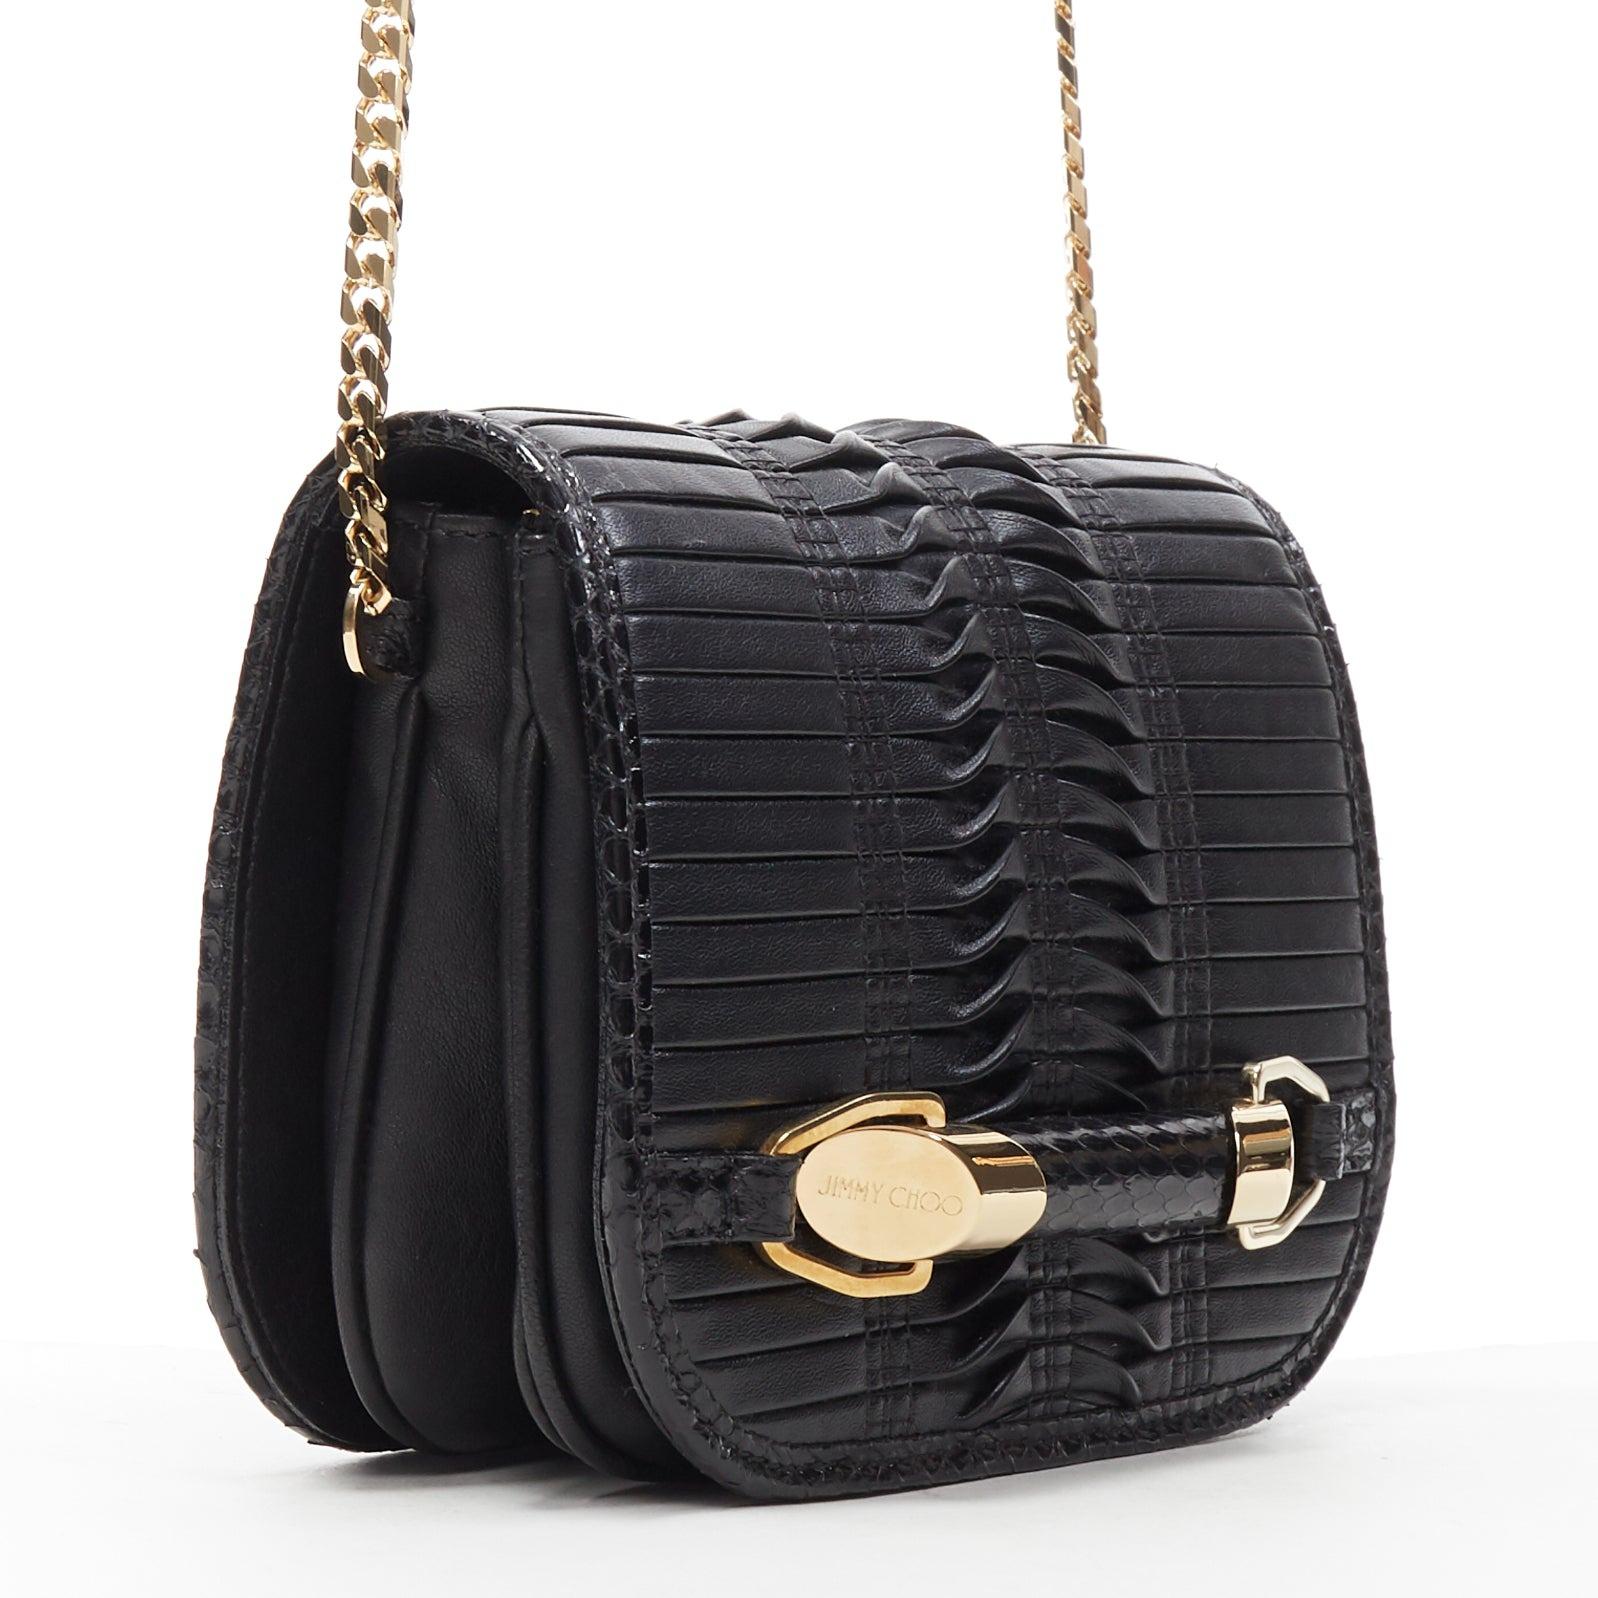 JIMMY CHOO black woven pleated leather gold bar detail flap crossbody bag
Reference: MAWG/A00014
Brand: Jimmy Choo
Material: Leather
Color: Black
Pattern: Solid
Closure: Magnet
Extra Details: Genuine leather. Black woven and pleated upper. Gold tone